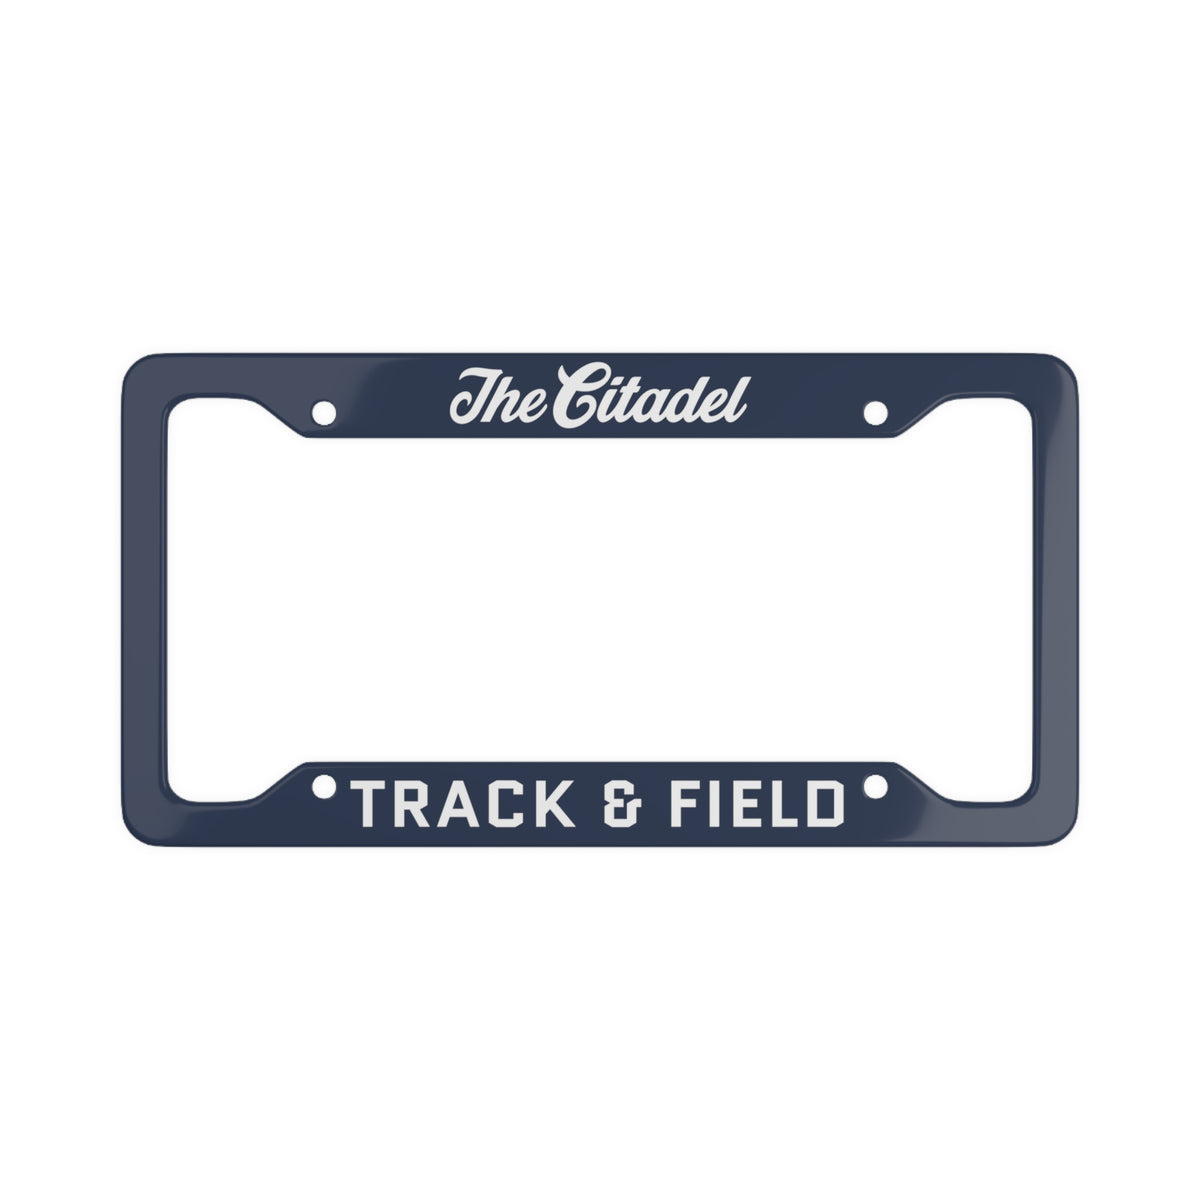 The Citadel, Track & Field License Plate Frame